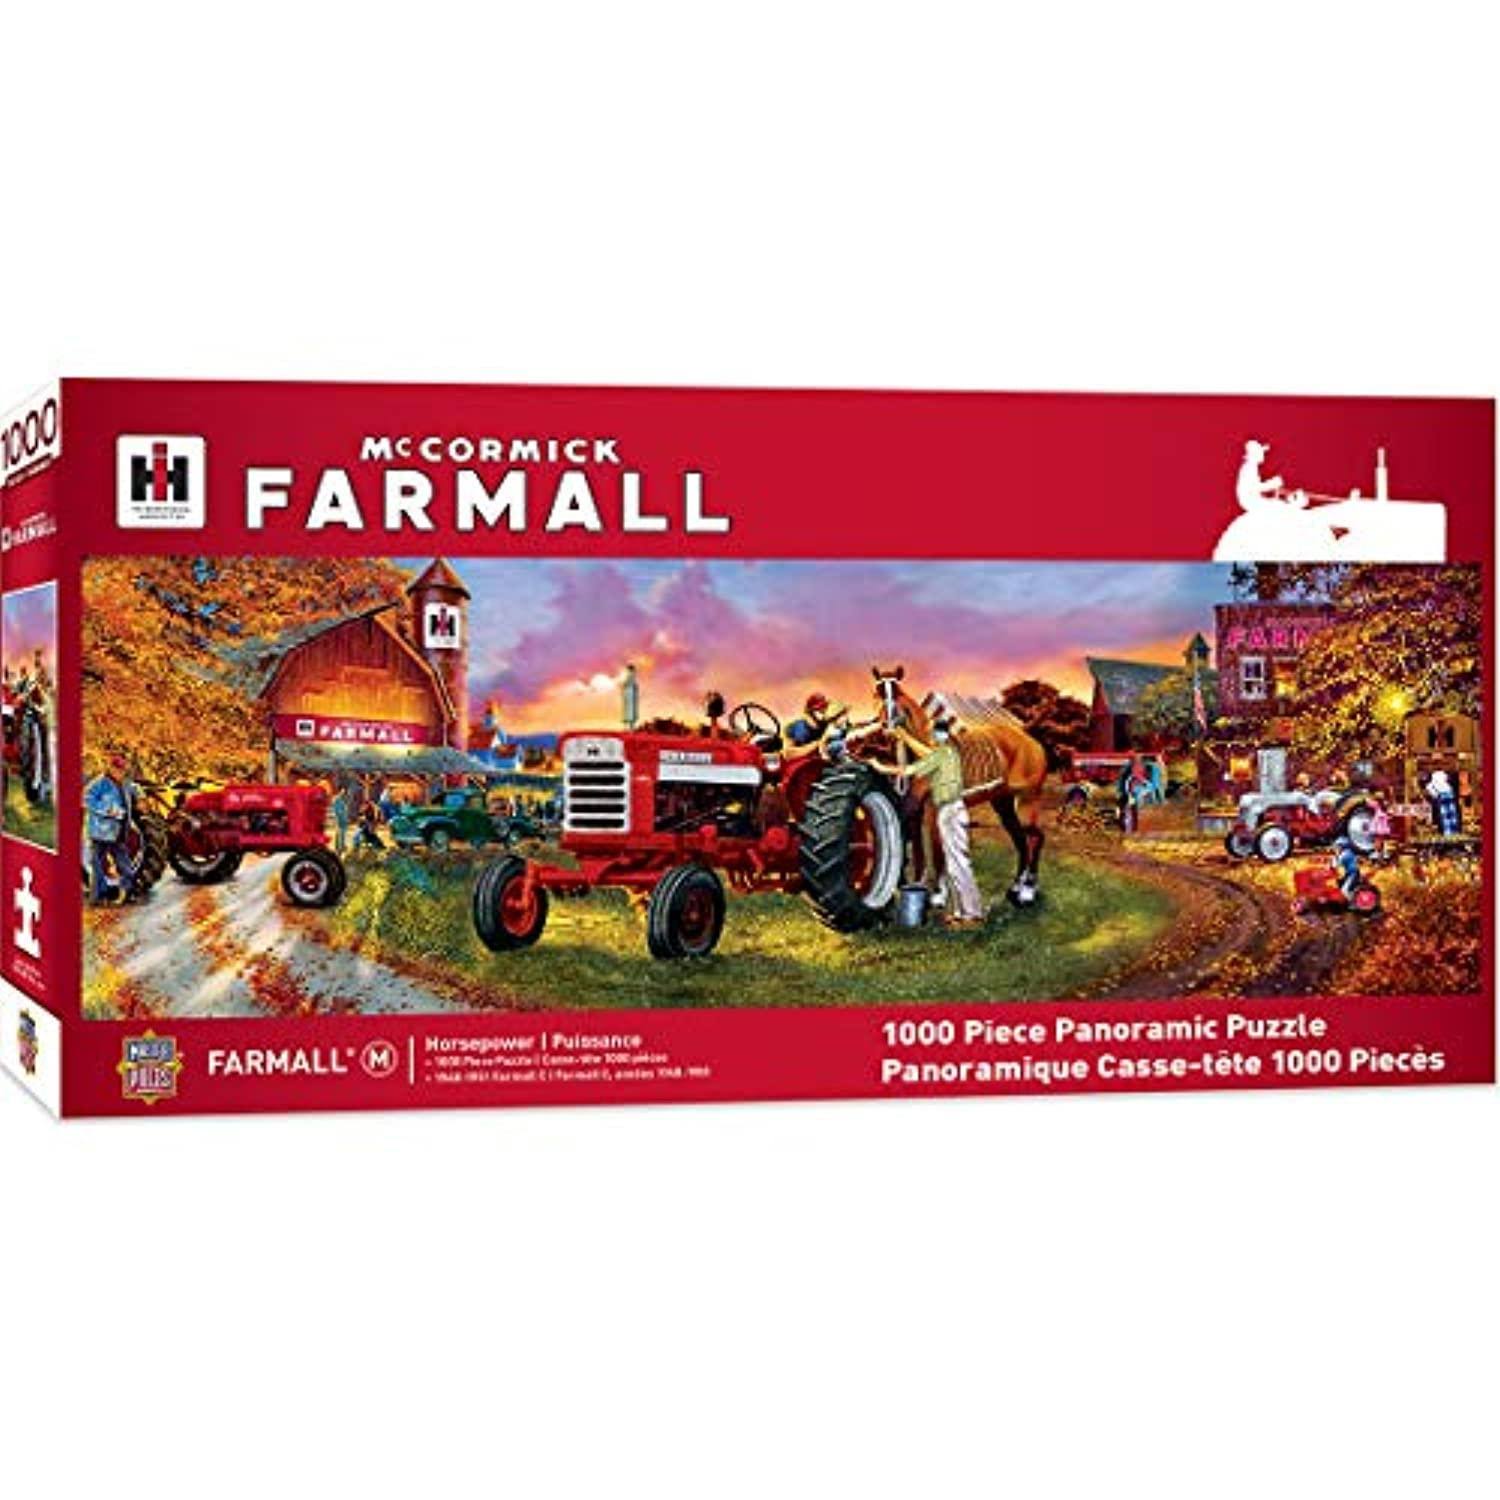 MasterPieces Farmall Horse Power Panoramic 1000pc Puzzle